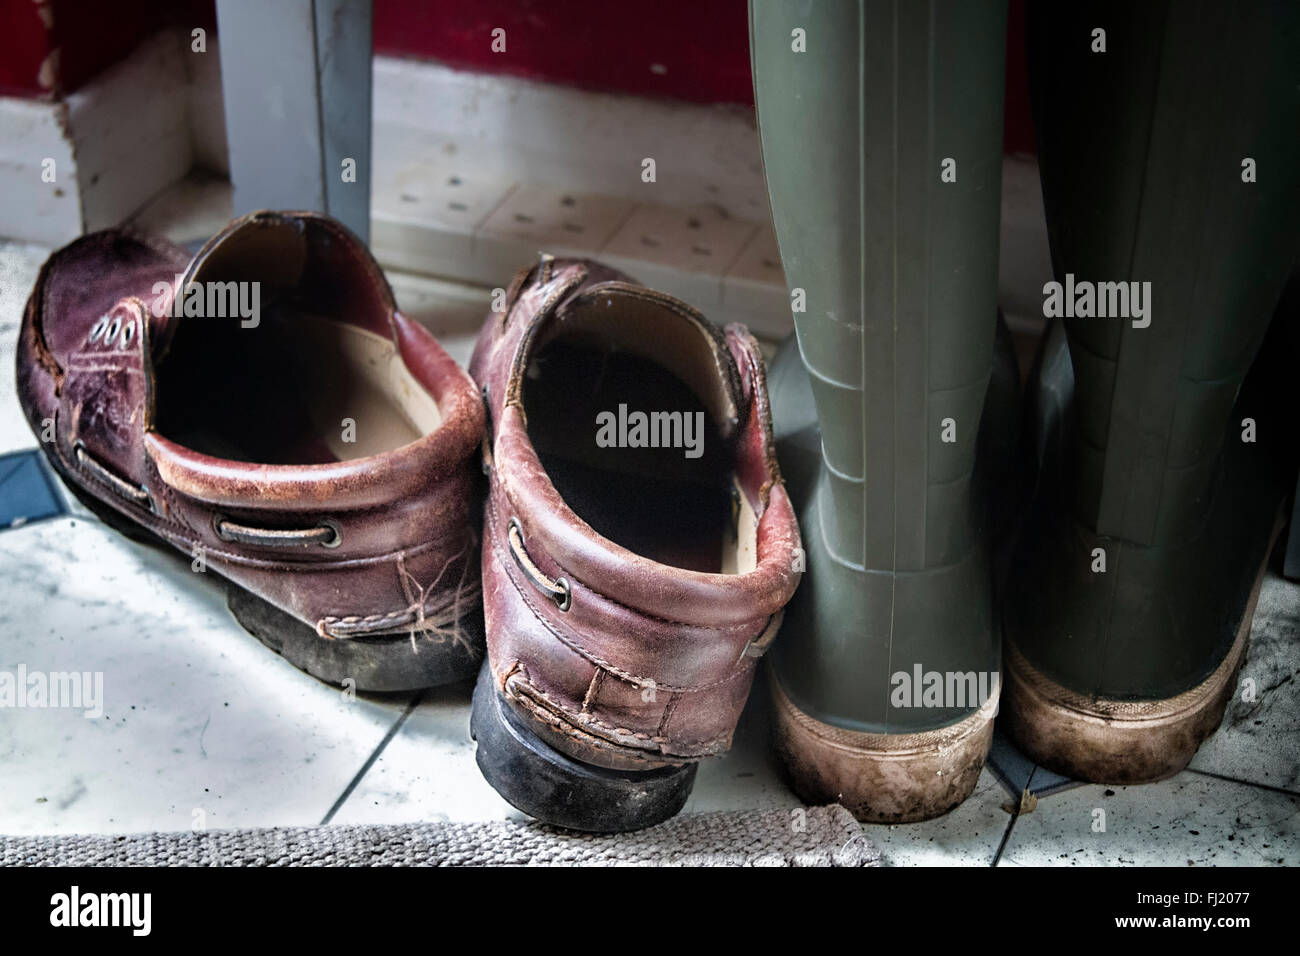 Pair of leather shoes and a pair of muddy boots together on the floor in the corner of a room Stock Photo